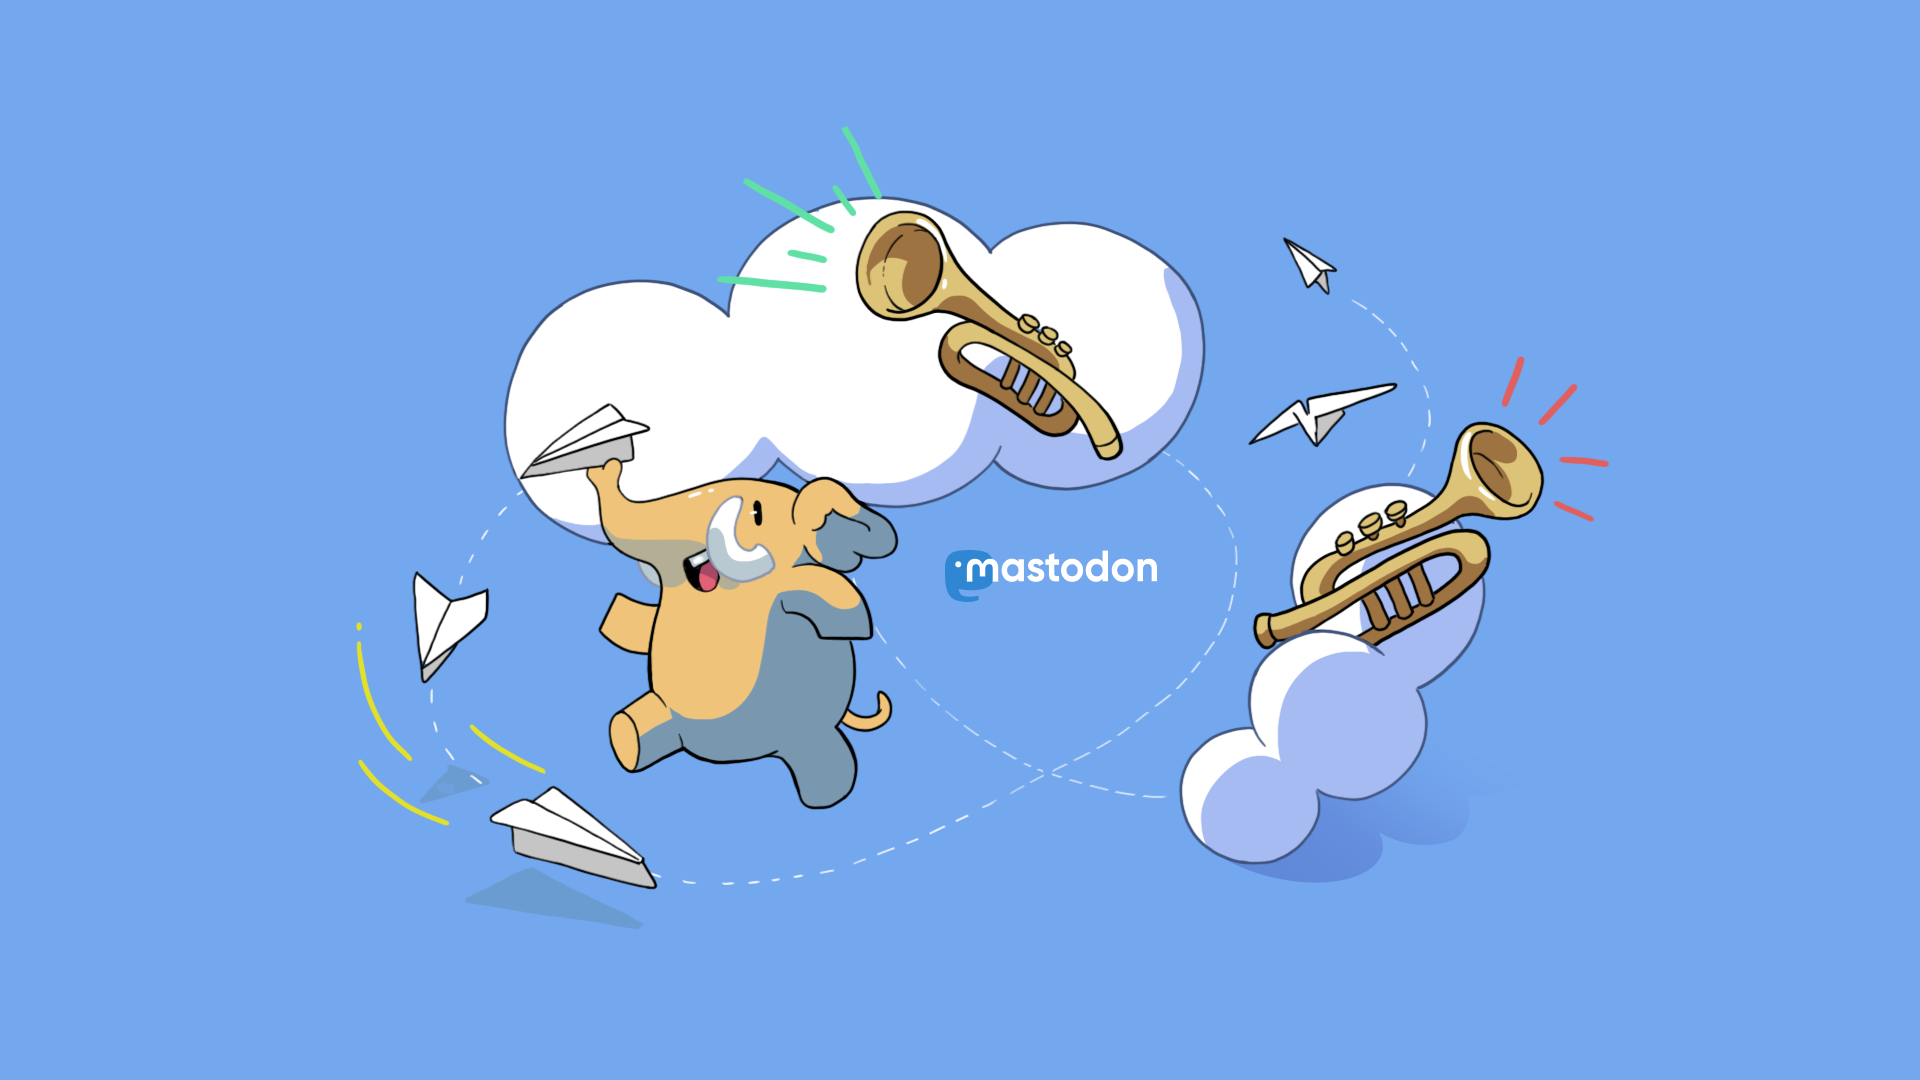 Let's do an overview of the past 365 days on the Mastodon social network.